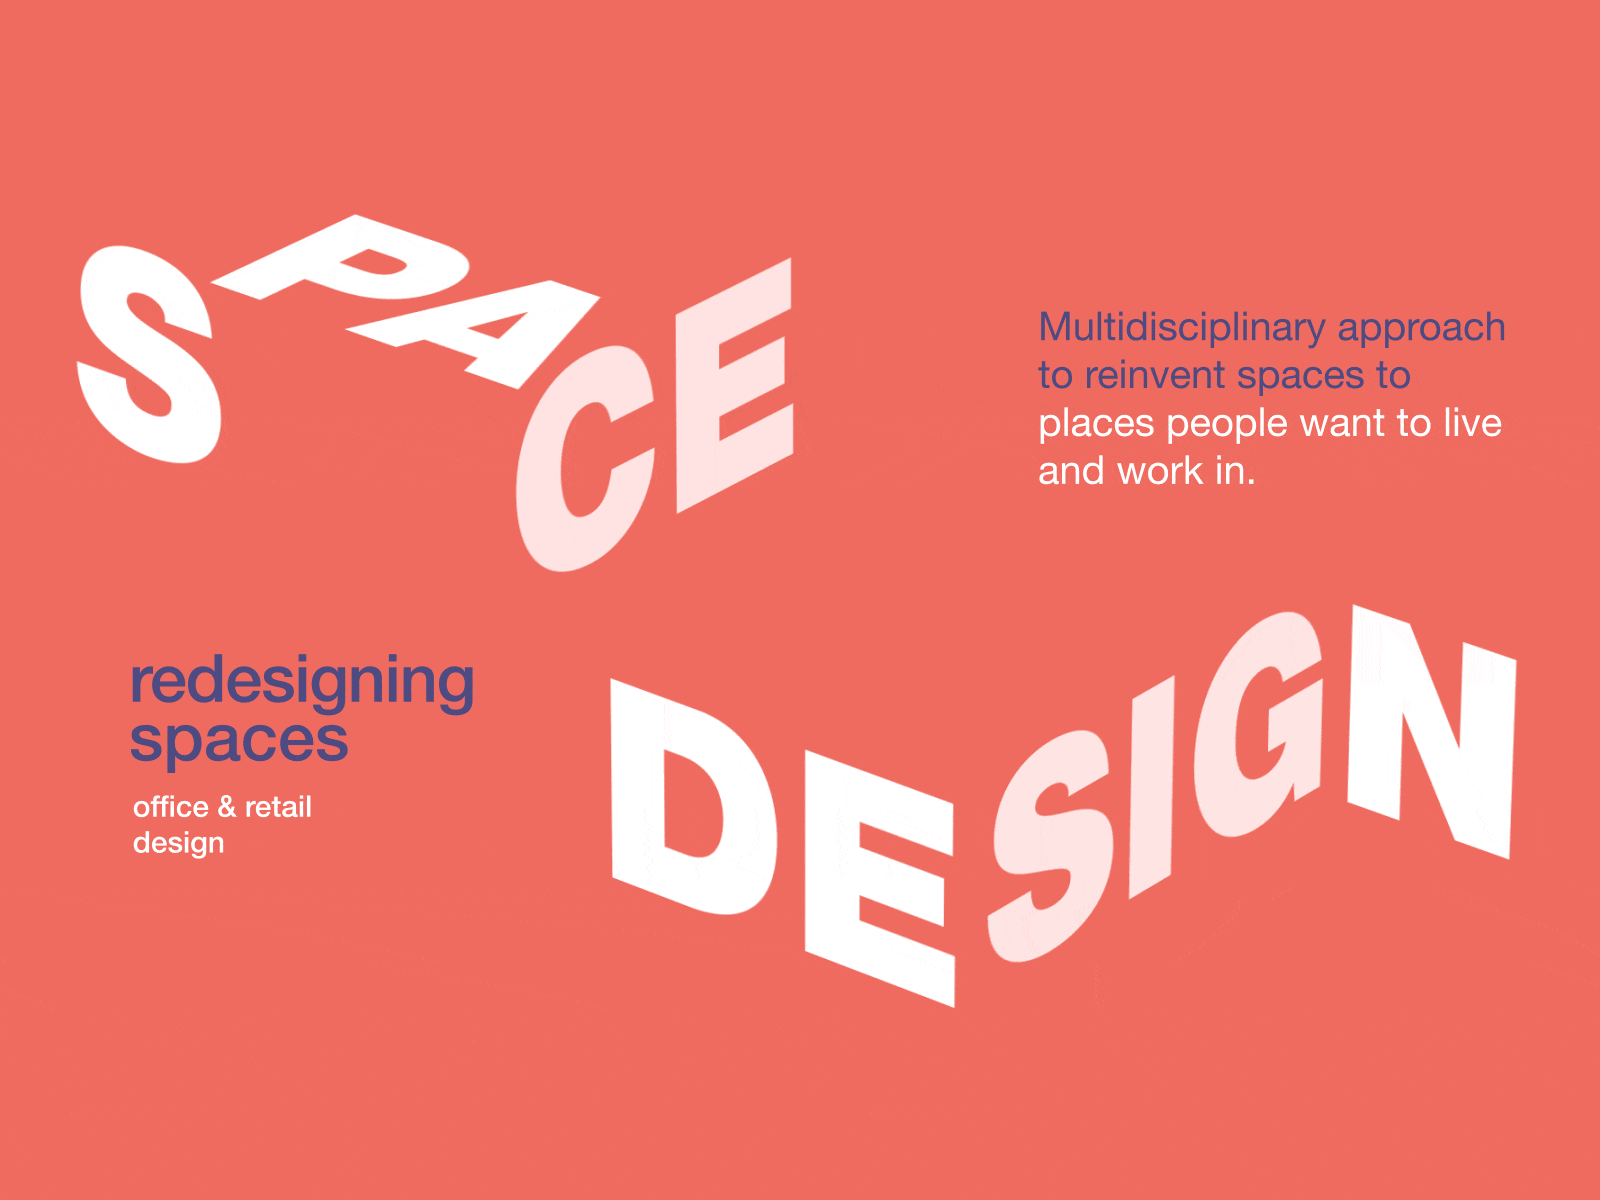 Launchlabs | Space Design 3d animation atanas giew design design thinking editorial key visual kinetic kinetic type kinetic typography kinetictype kinetictypography lettering letters motion motion design motion typography space sprint thinking